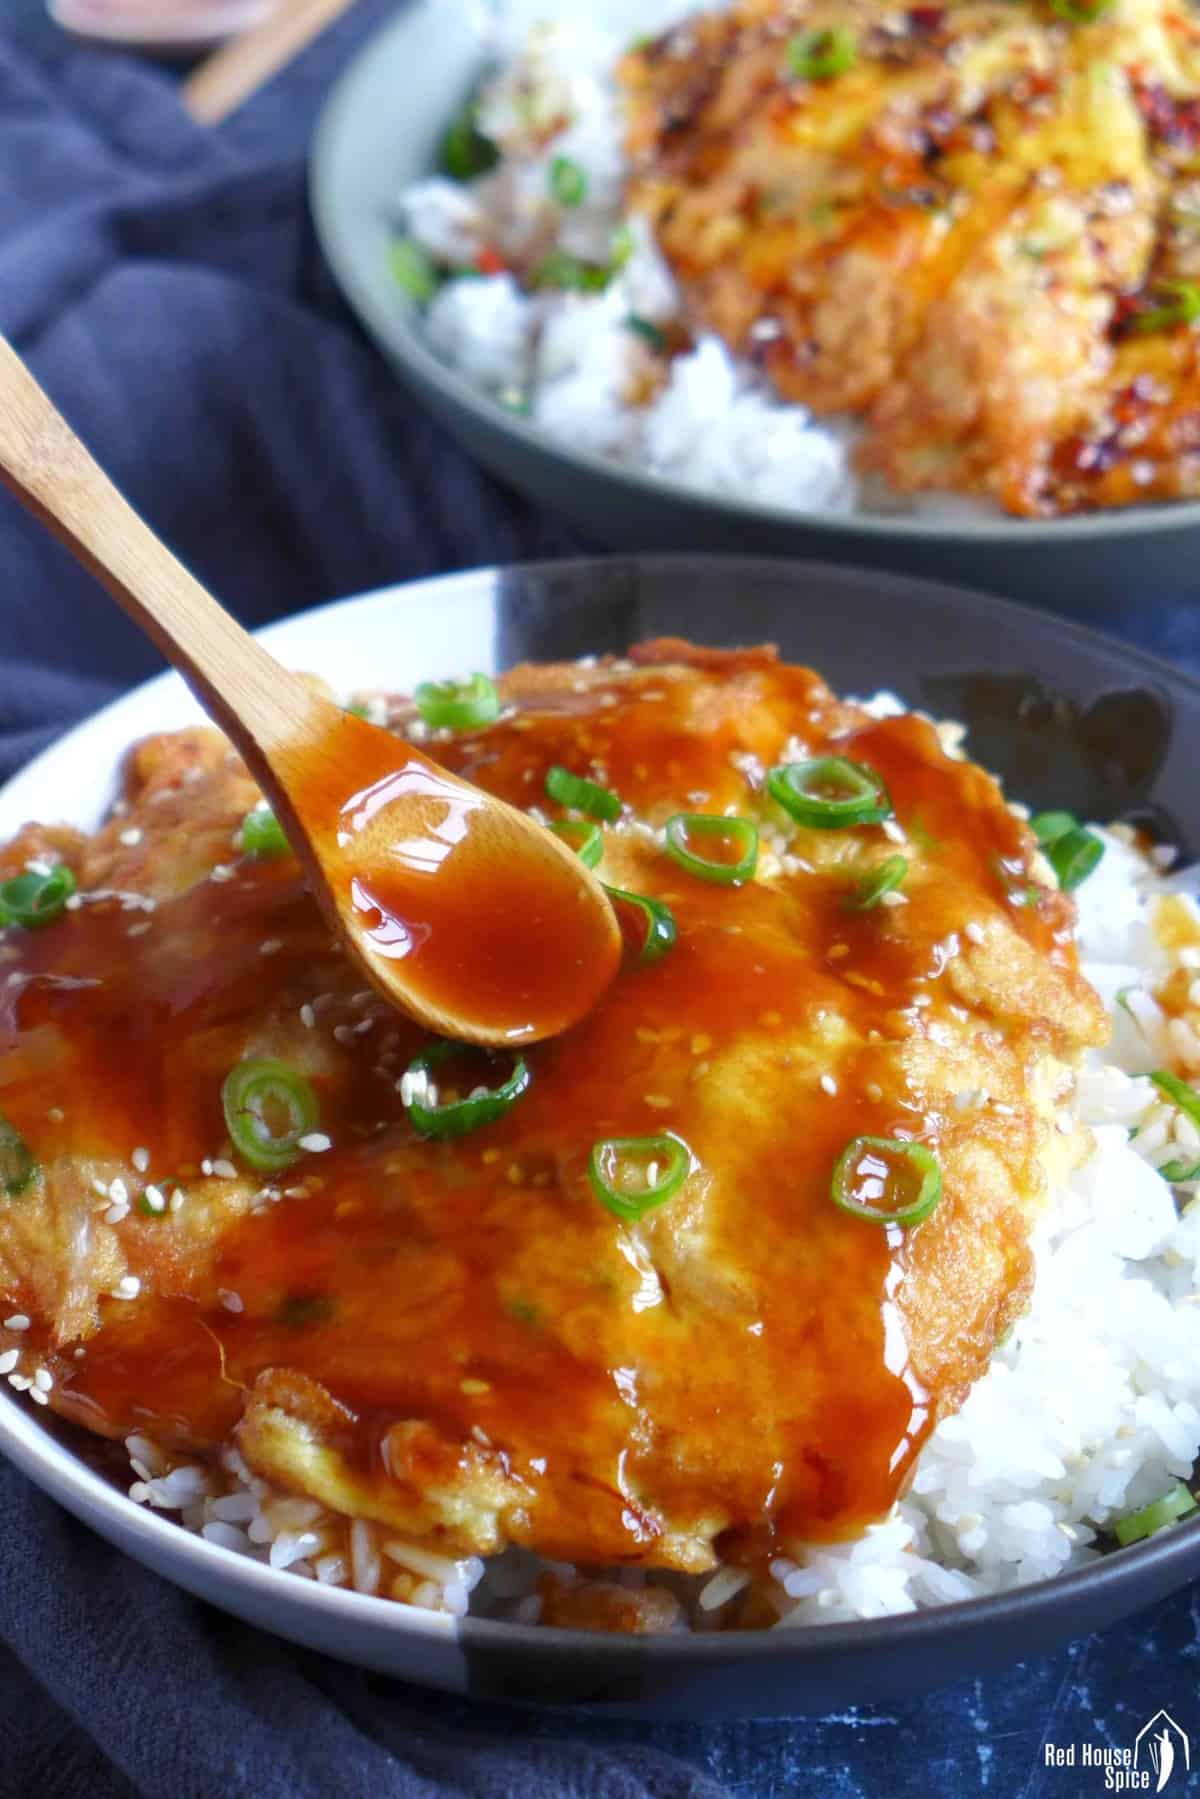 spooning gravy over egg foo young